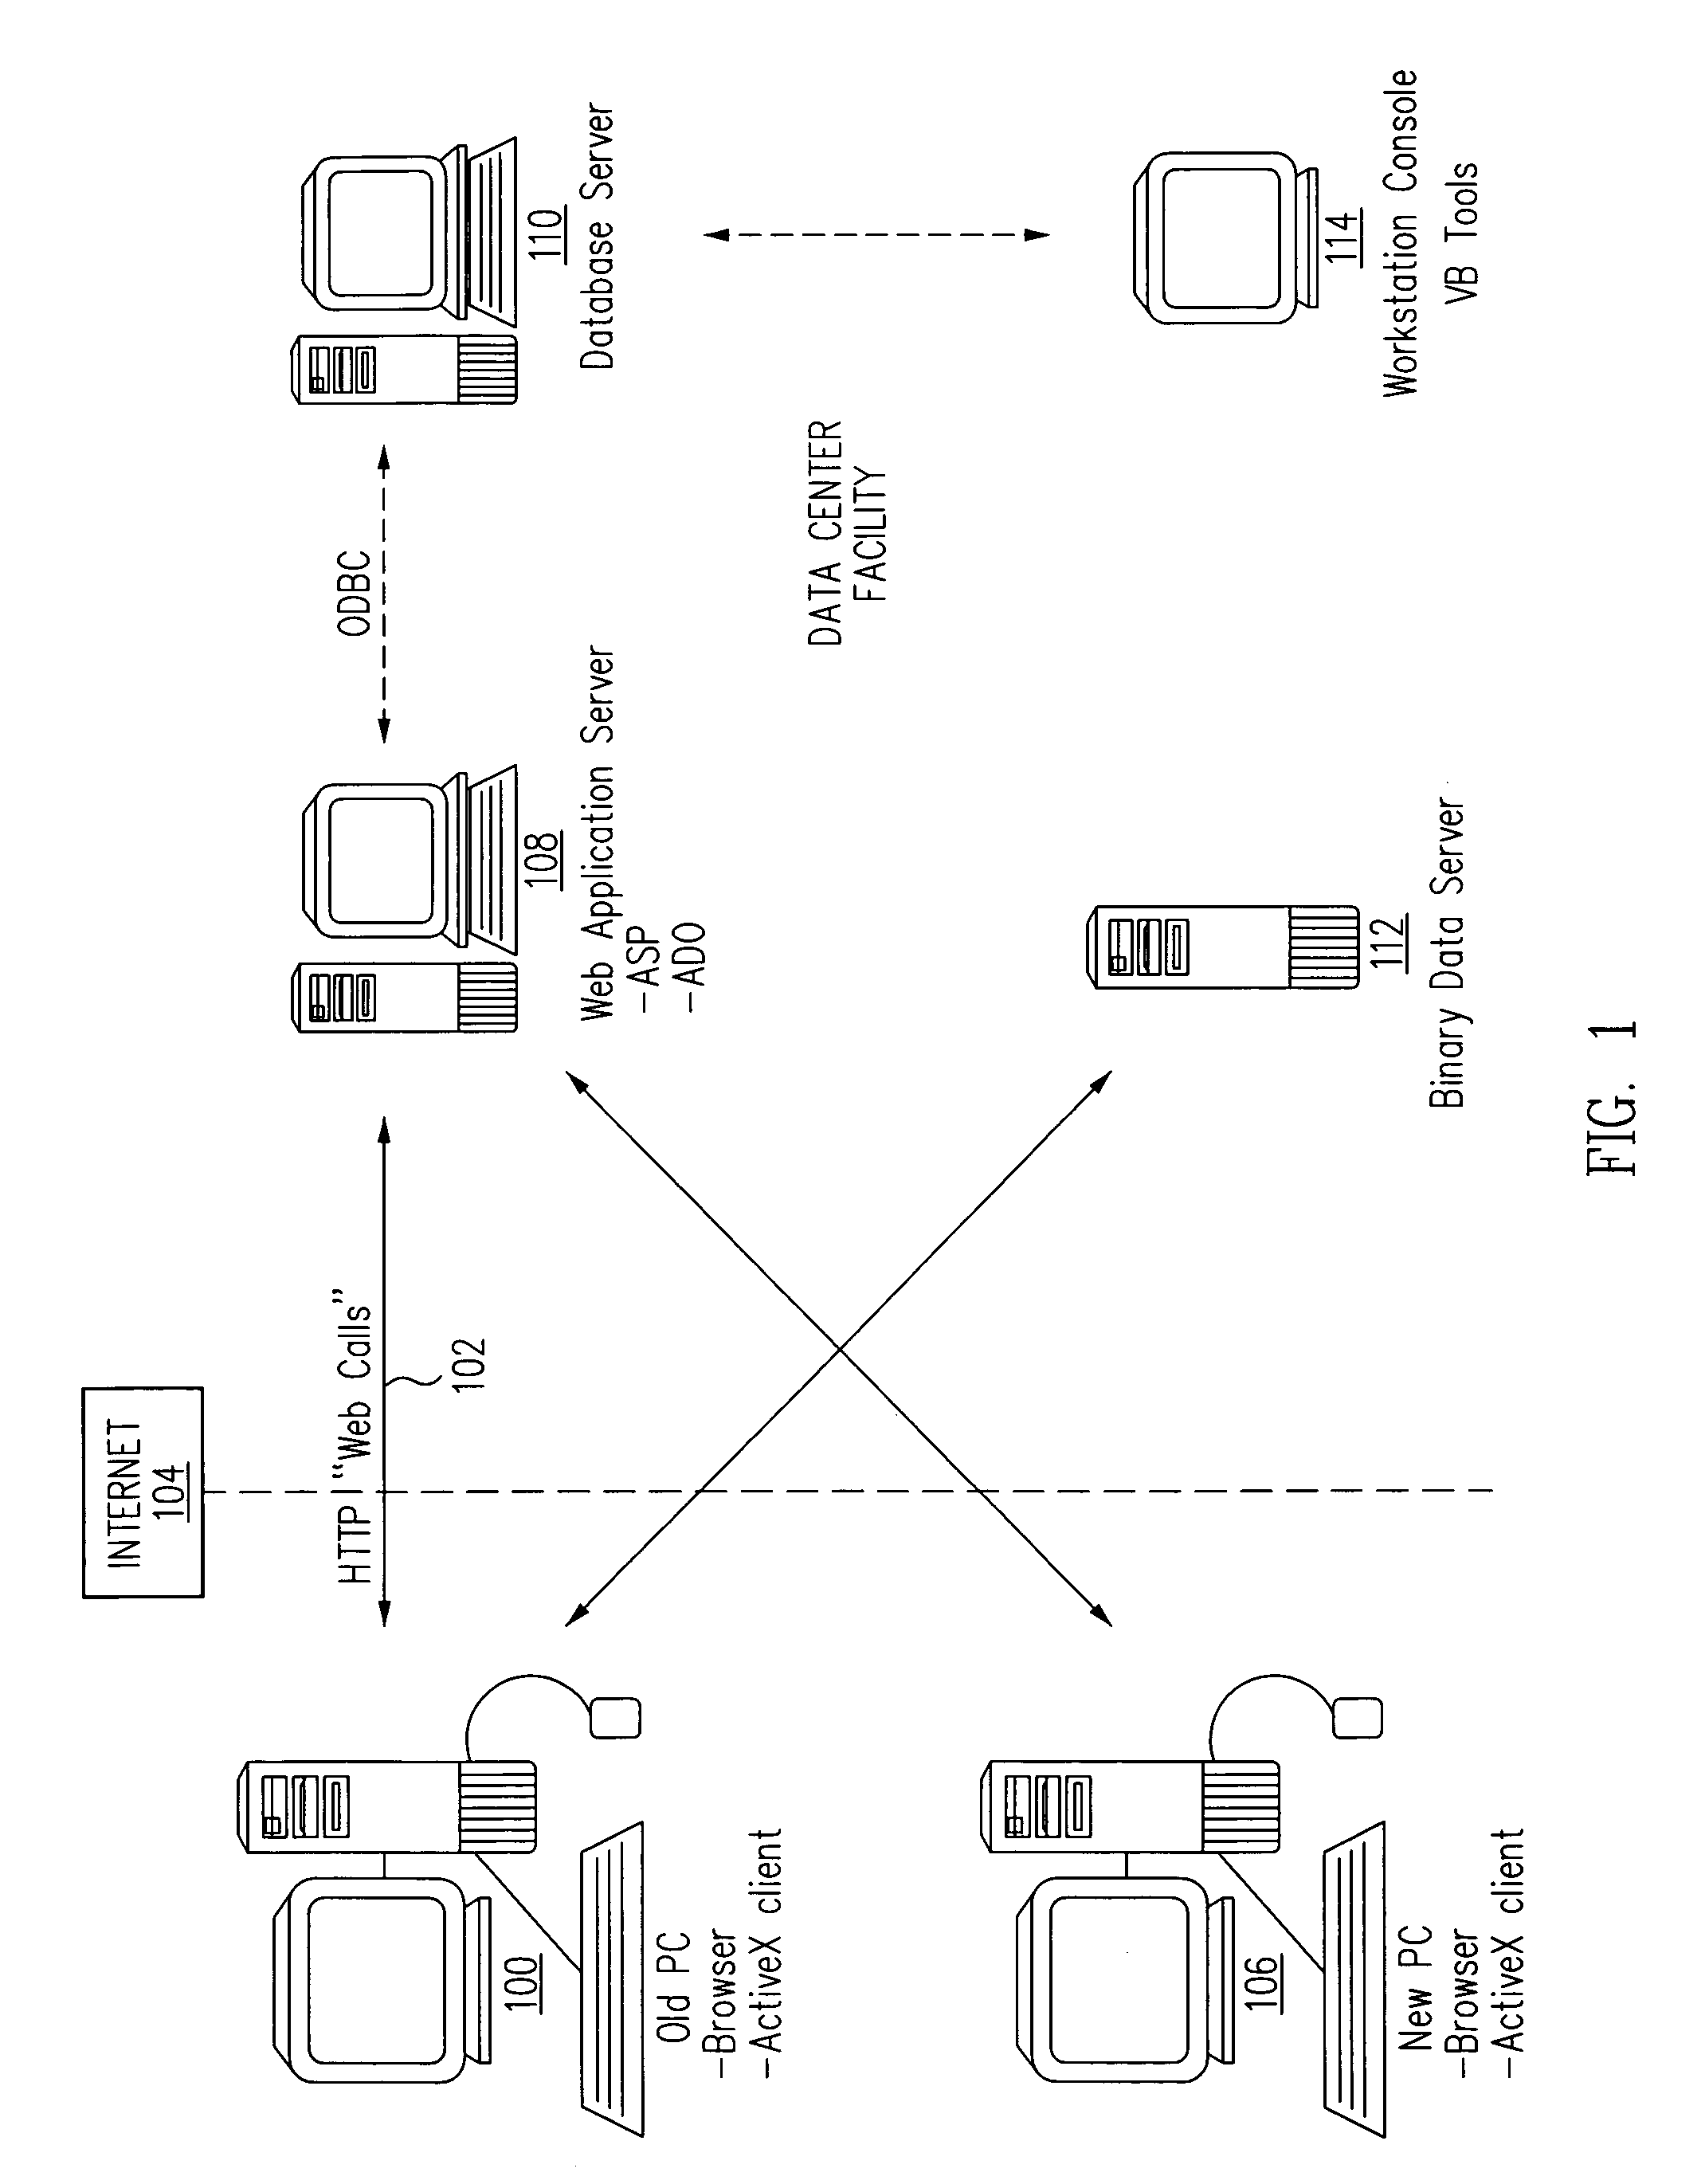 System for transferring customized hardware and software settings from one computer to another computer to provide personalized operating environments